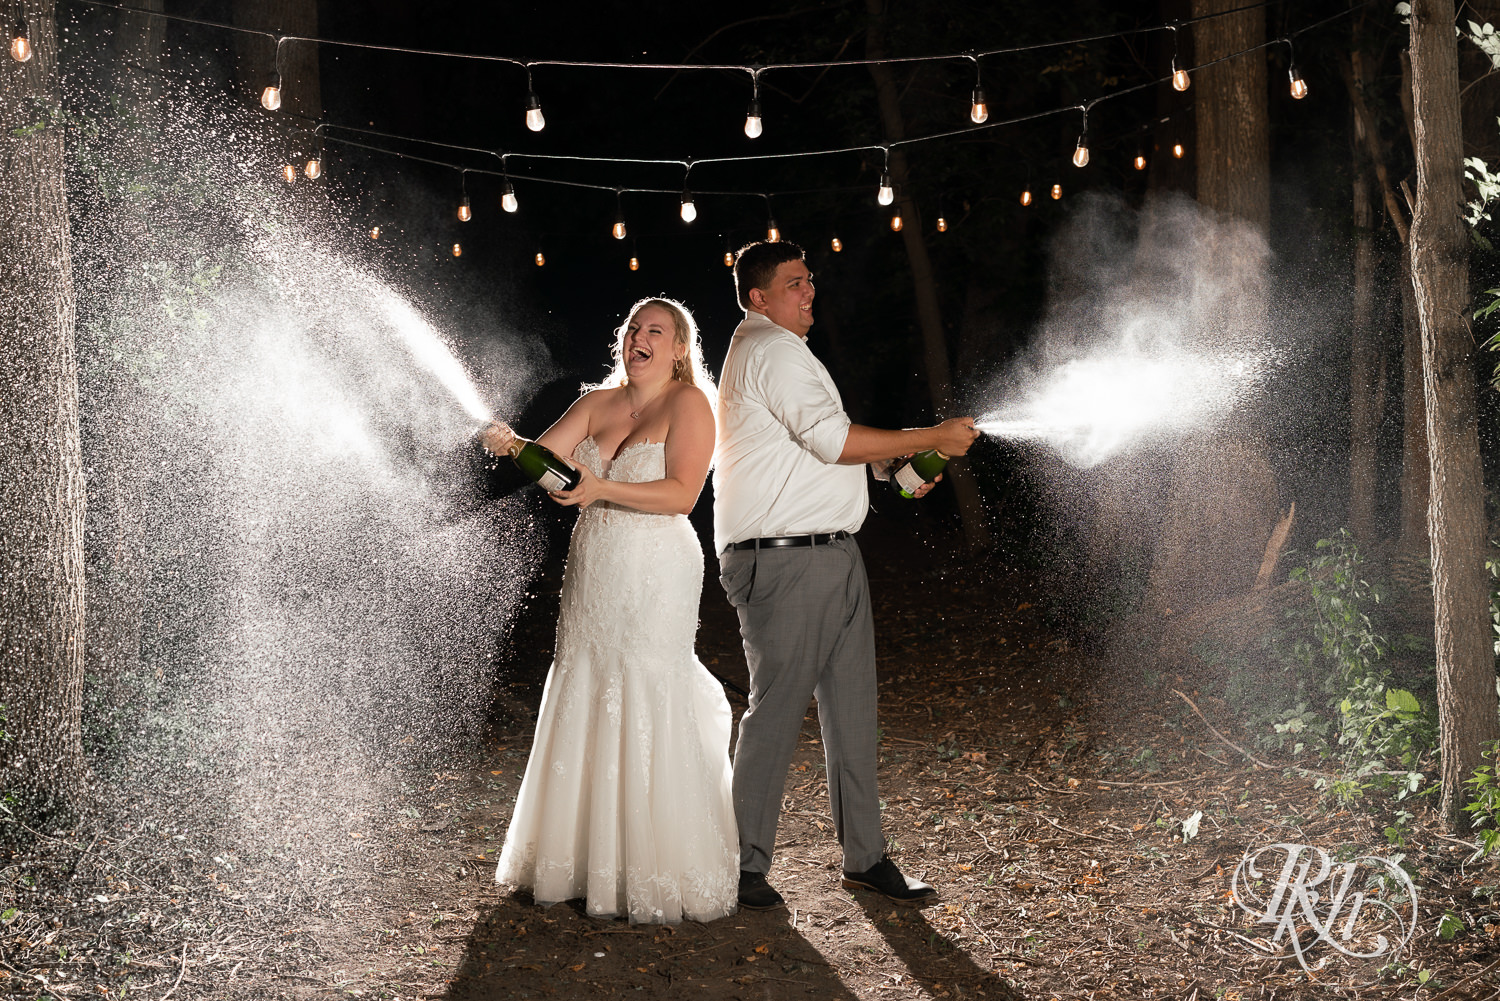 Bride and groom spray champagne at night at Cottage Farmhouse in Glencoe, Minnesota.